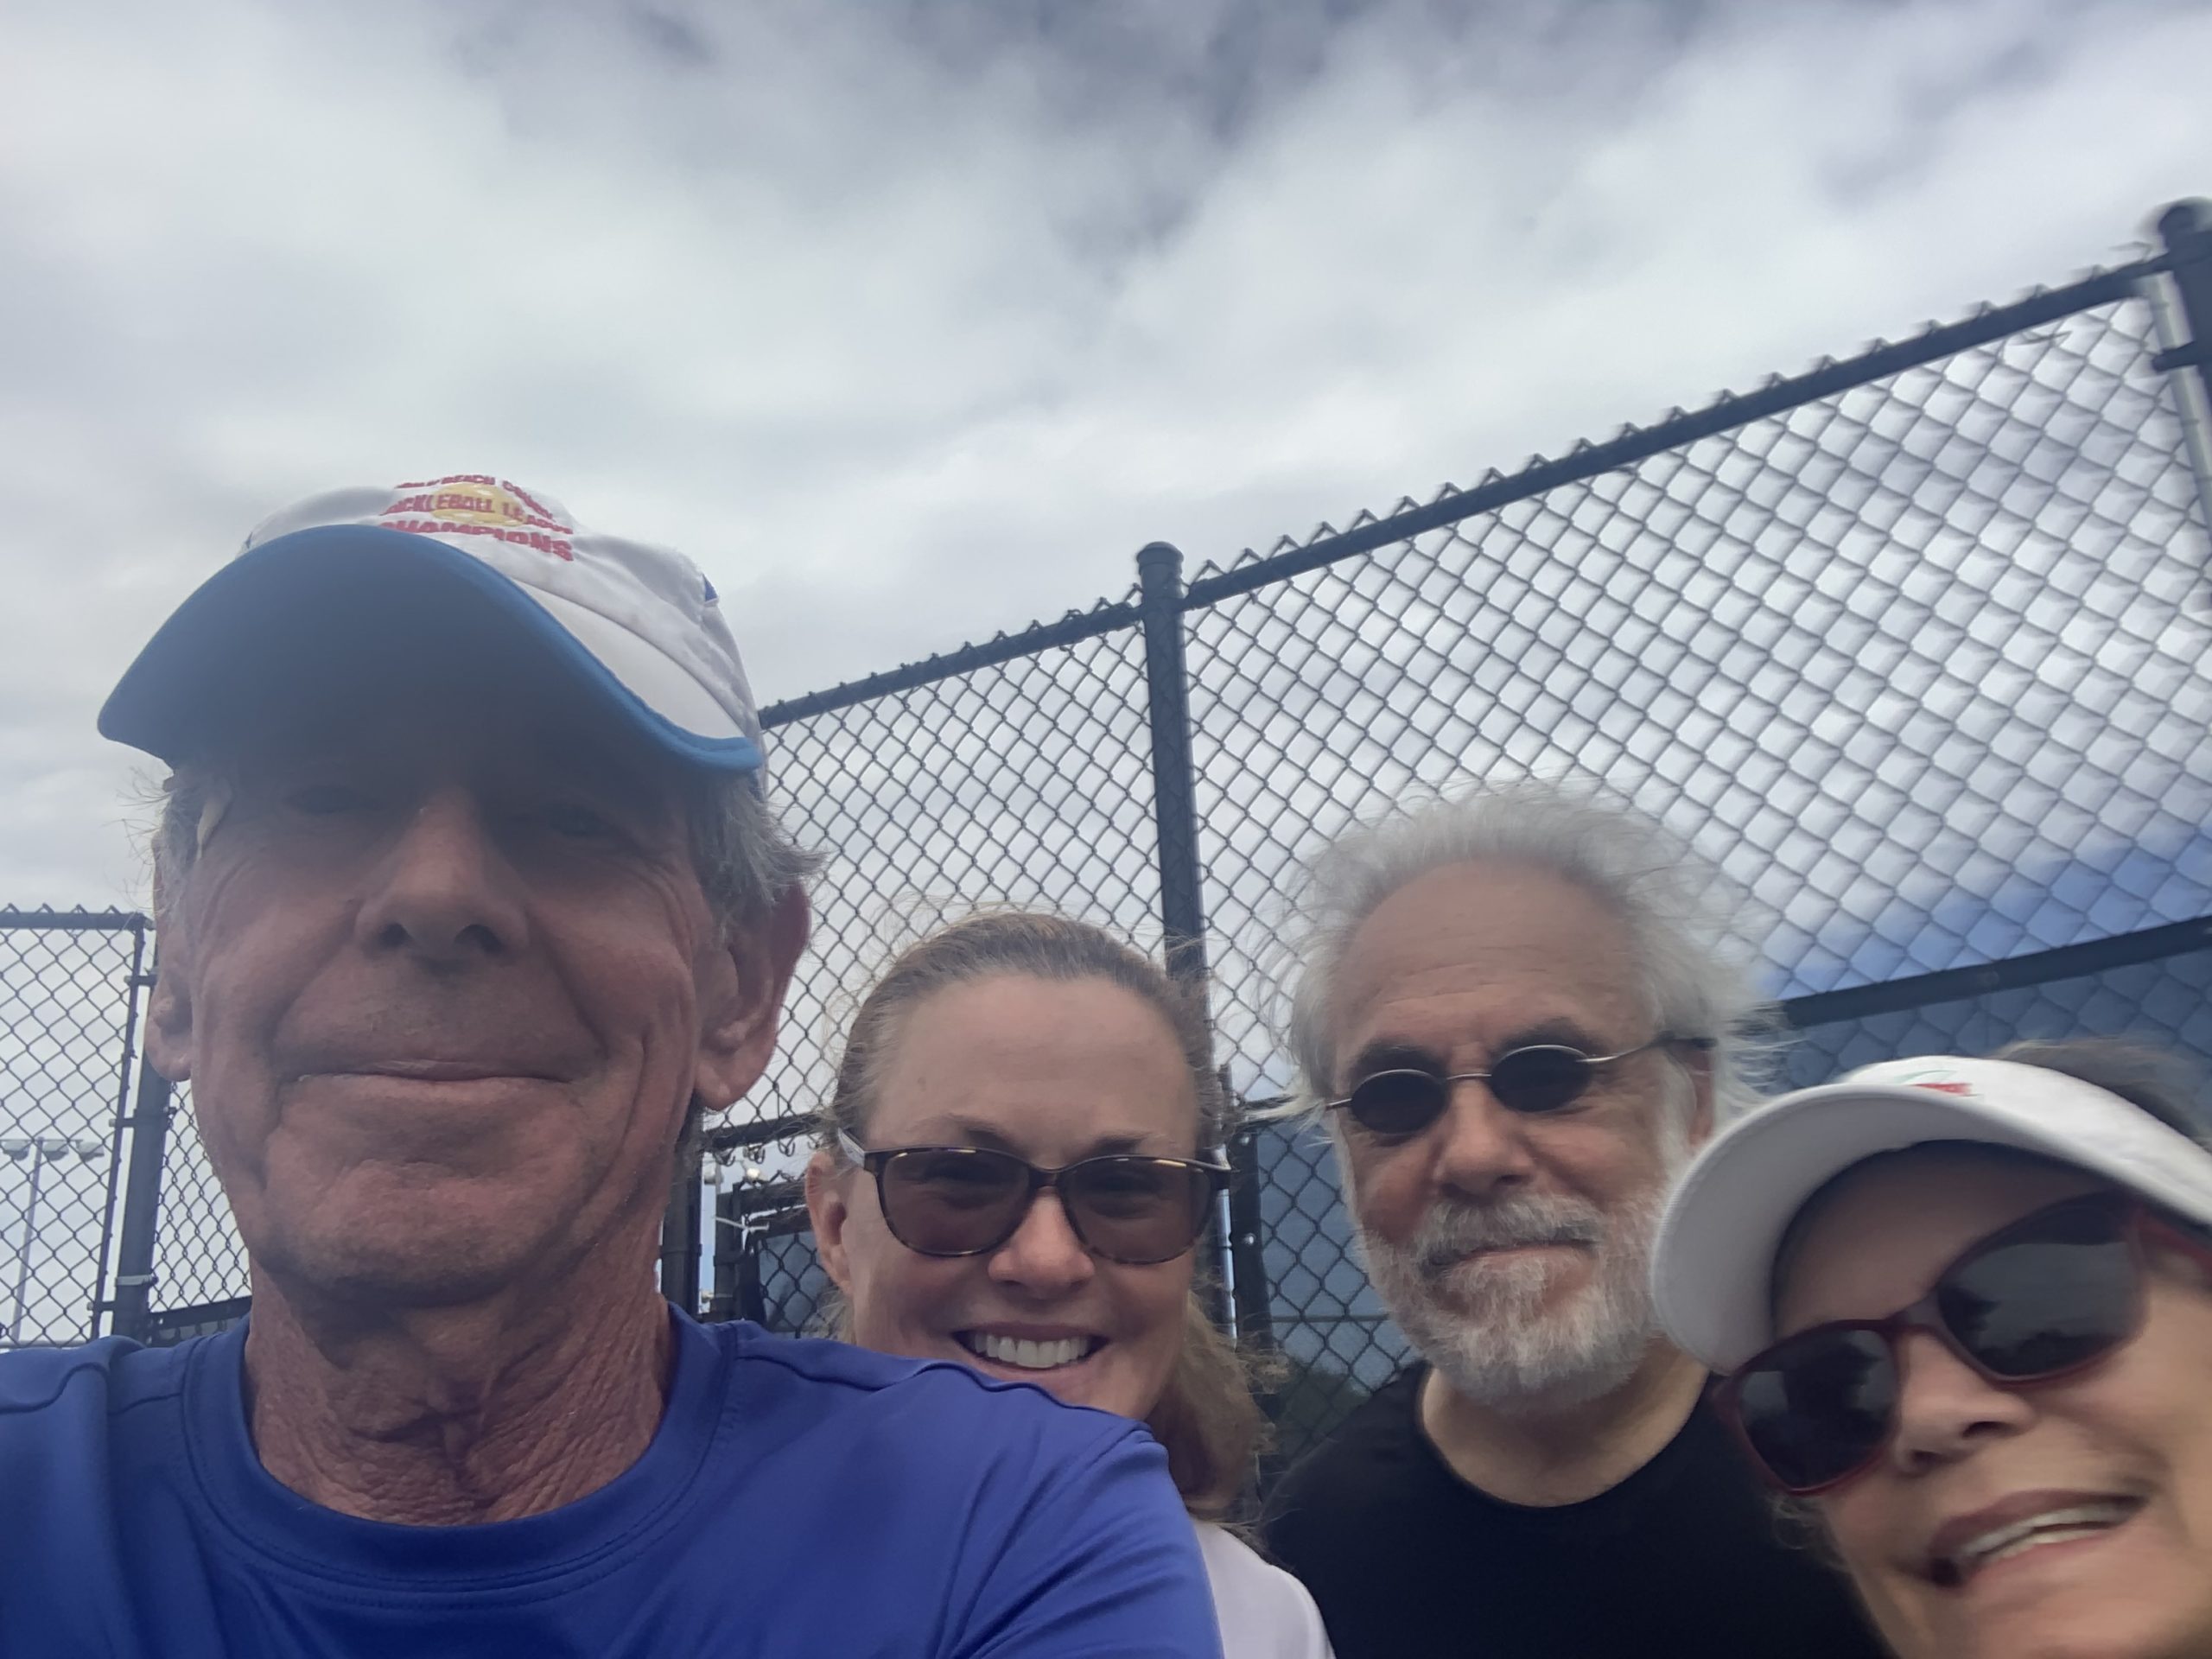 bob-with-shaina-samantha-lorraine-claire-and-katie-after-an-intermediate-pickleball-clinic-in-lake-worth-florida